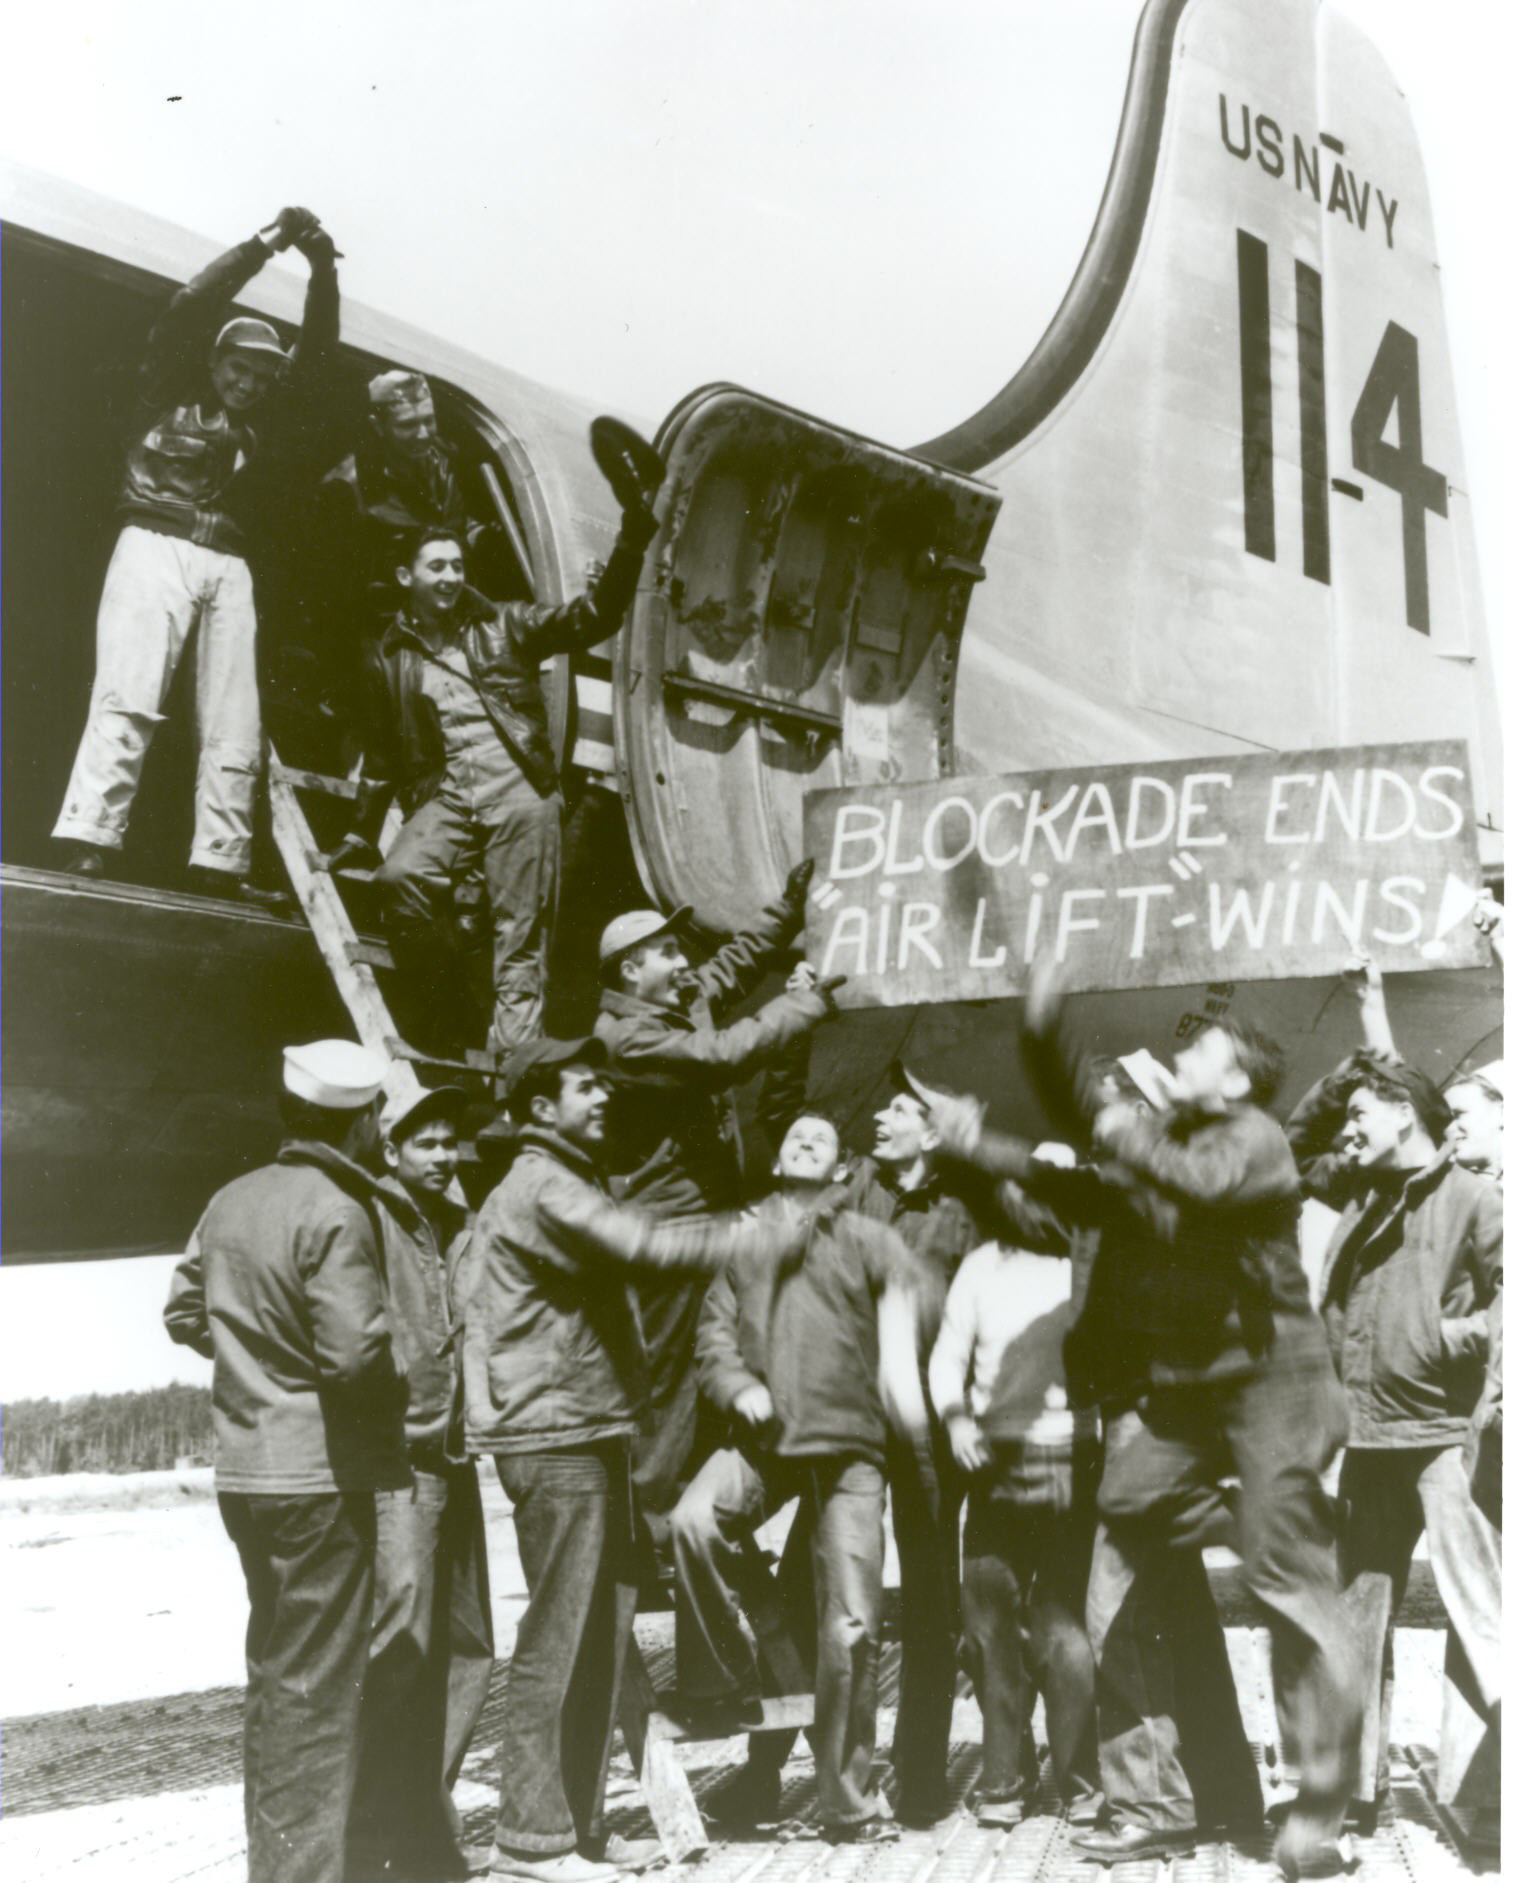 A group of men point to a sign outside of a plane that says "Blockade Ends Air Lift Wins"